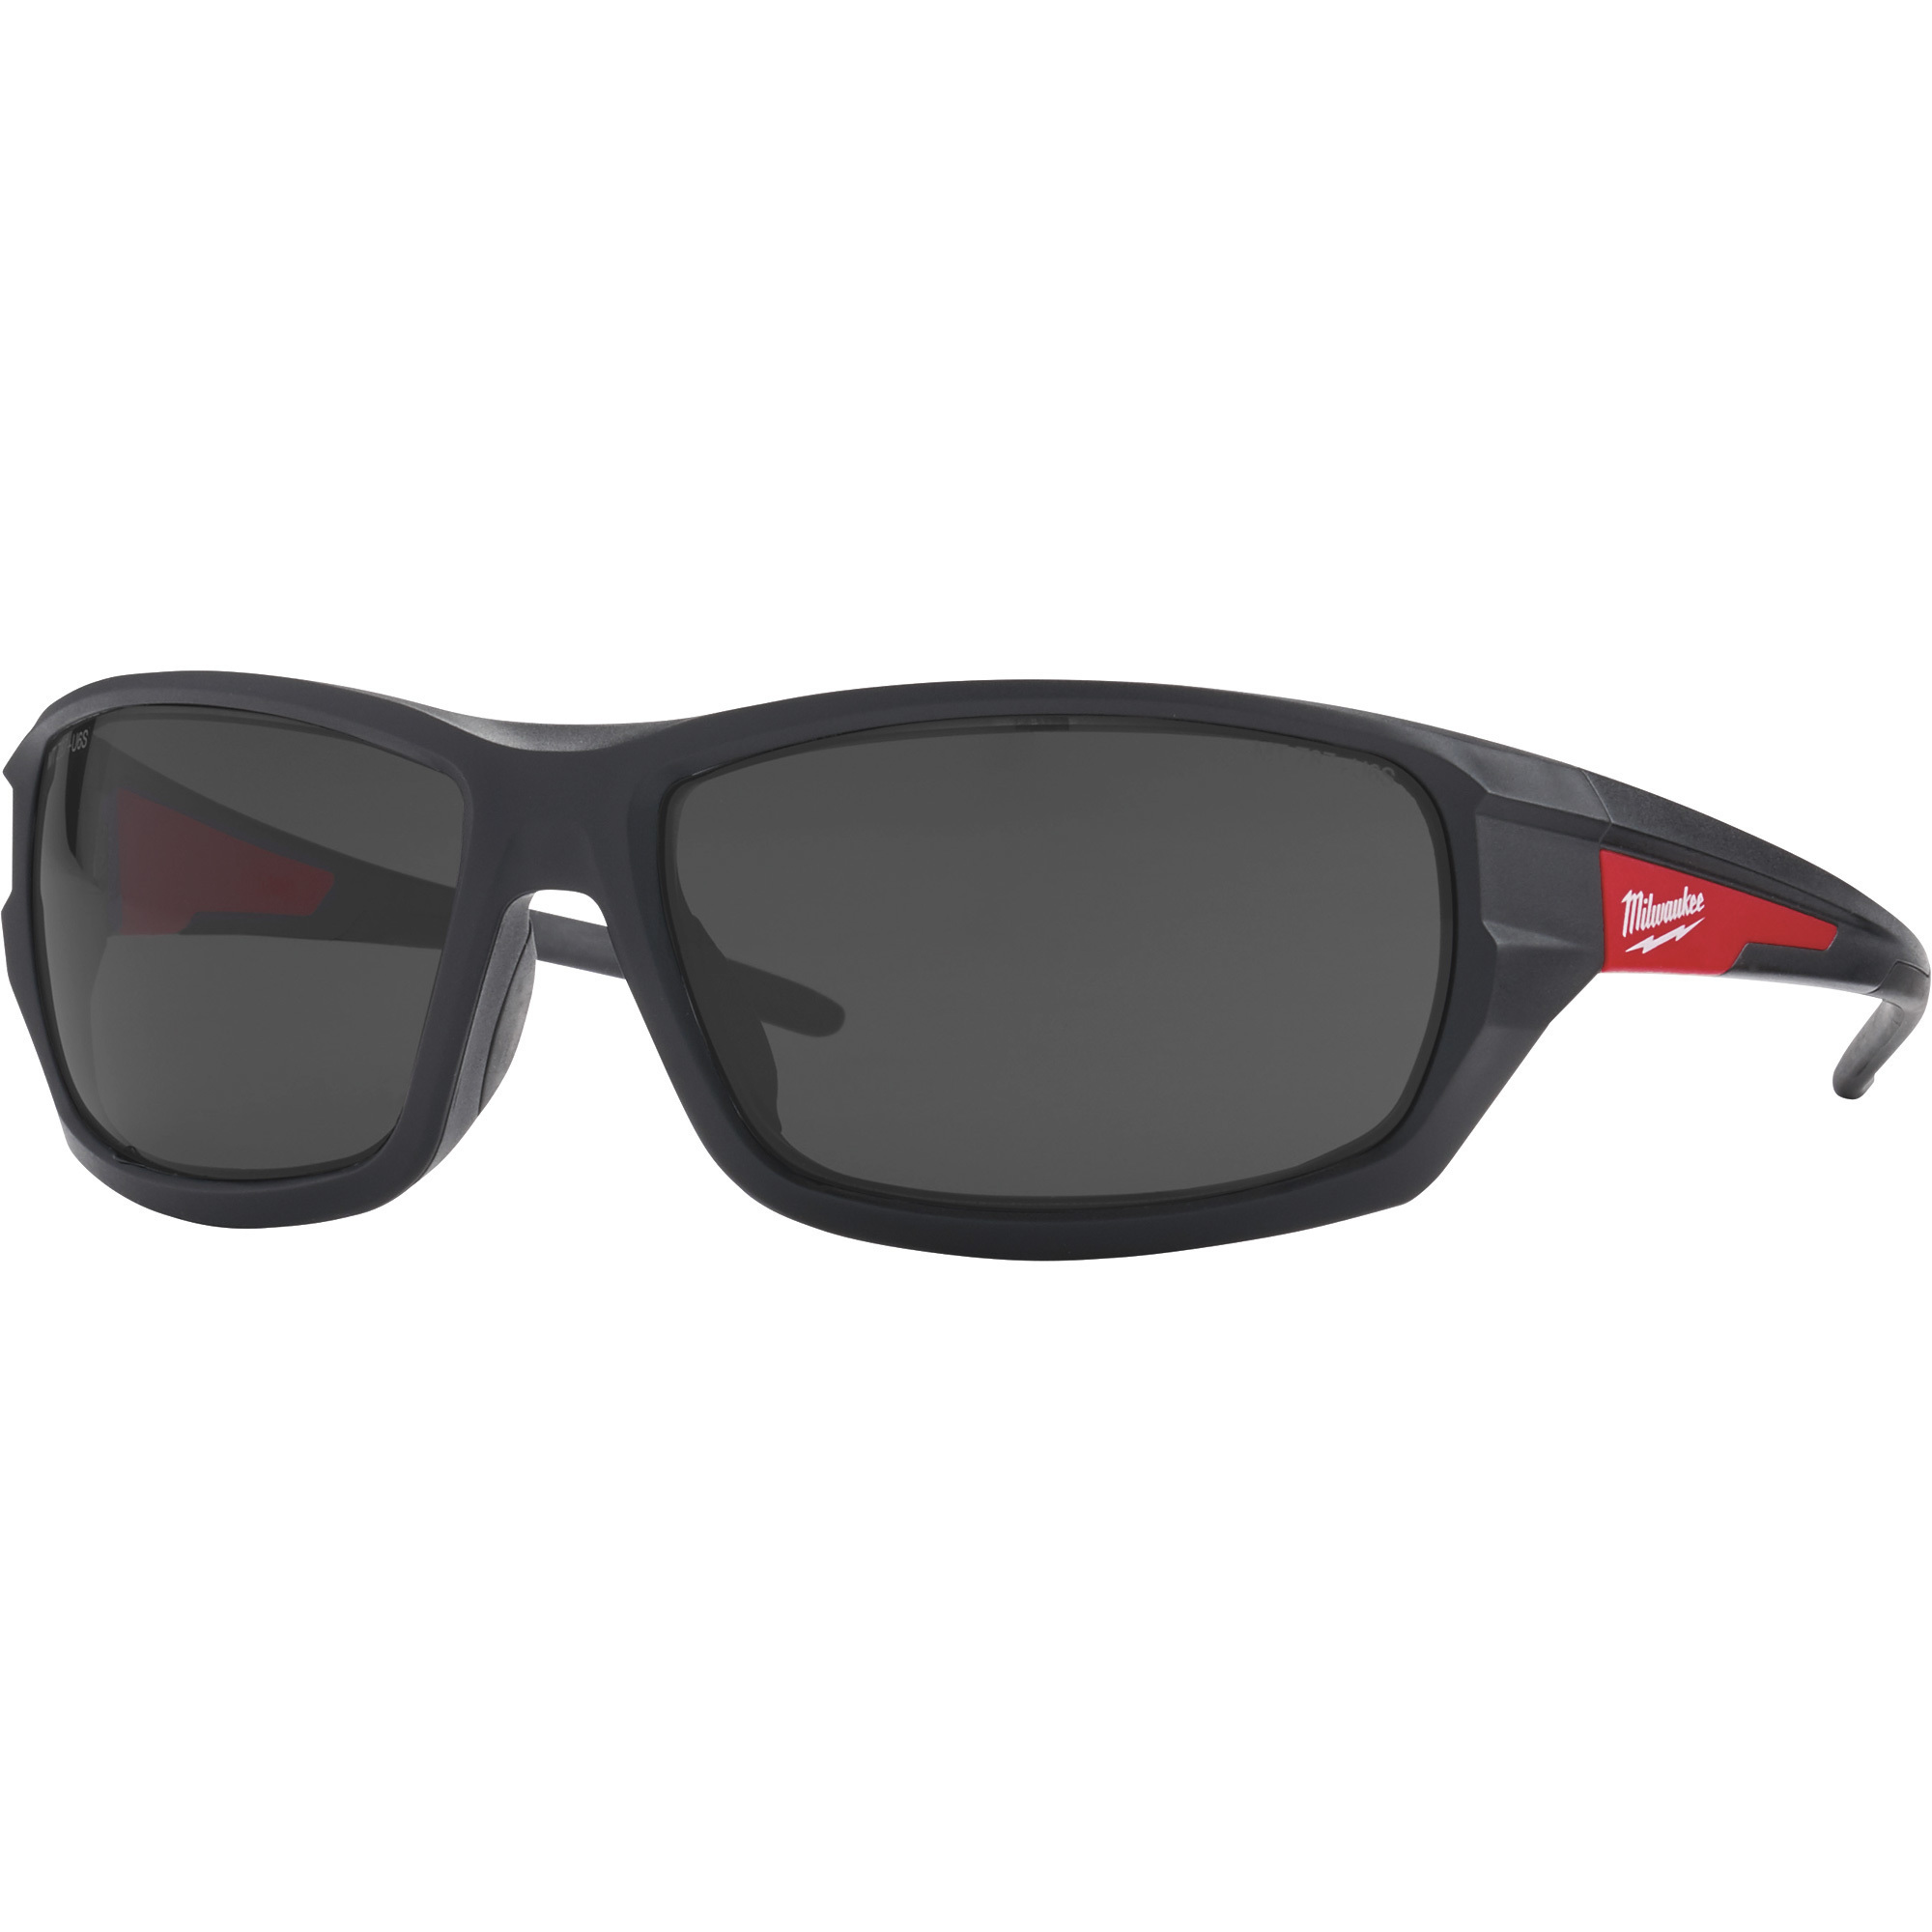 Milwaukee Indoor/Outdoor Safety Glasses with Military Grade Protection, Tinted Lenses, Black/Red Frames, Model 48-73-2025